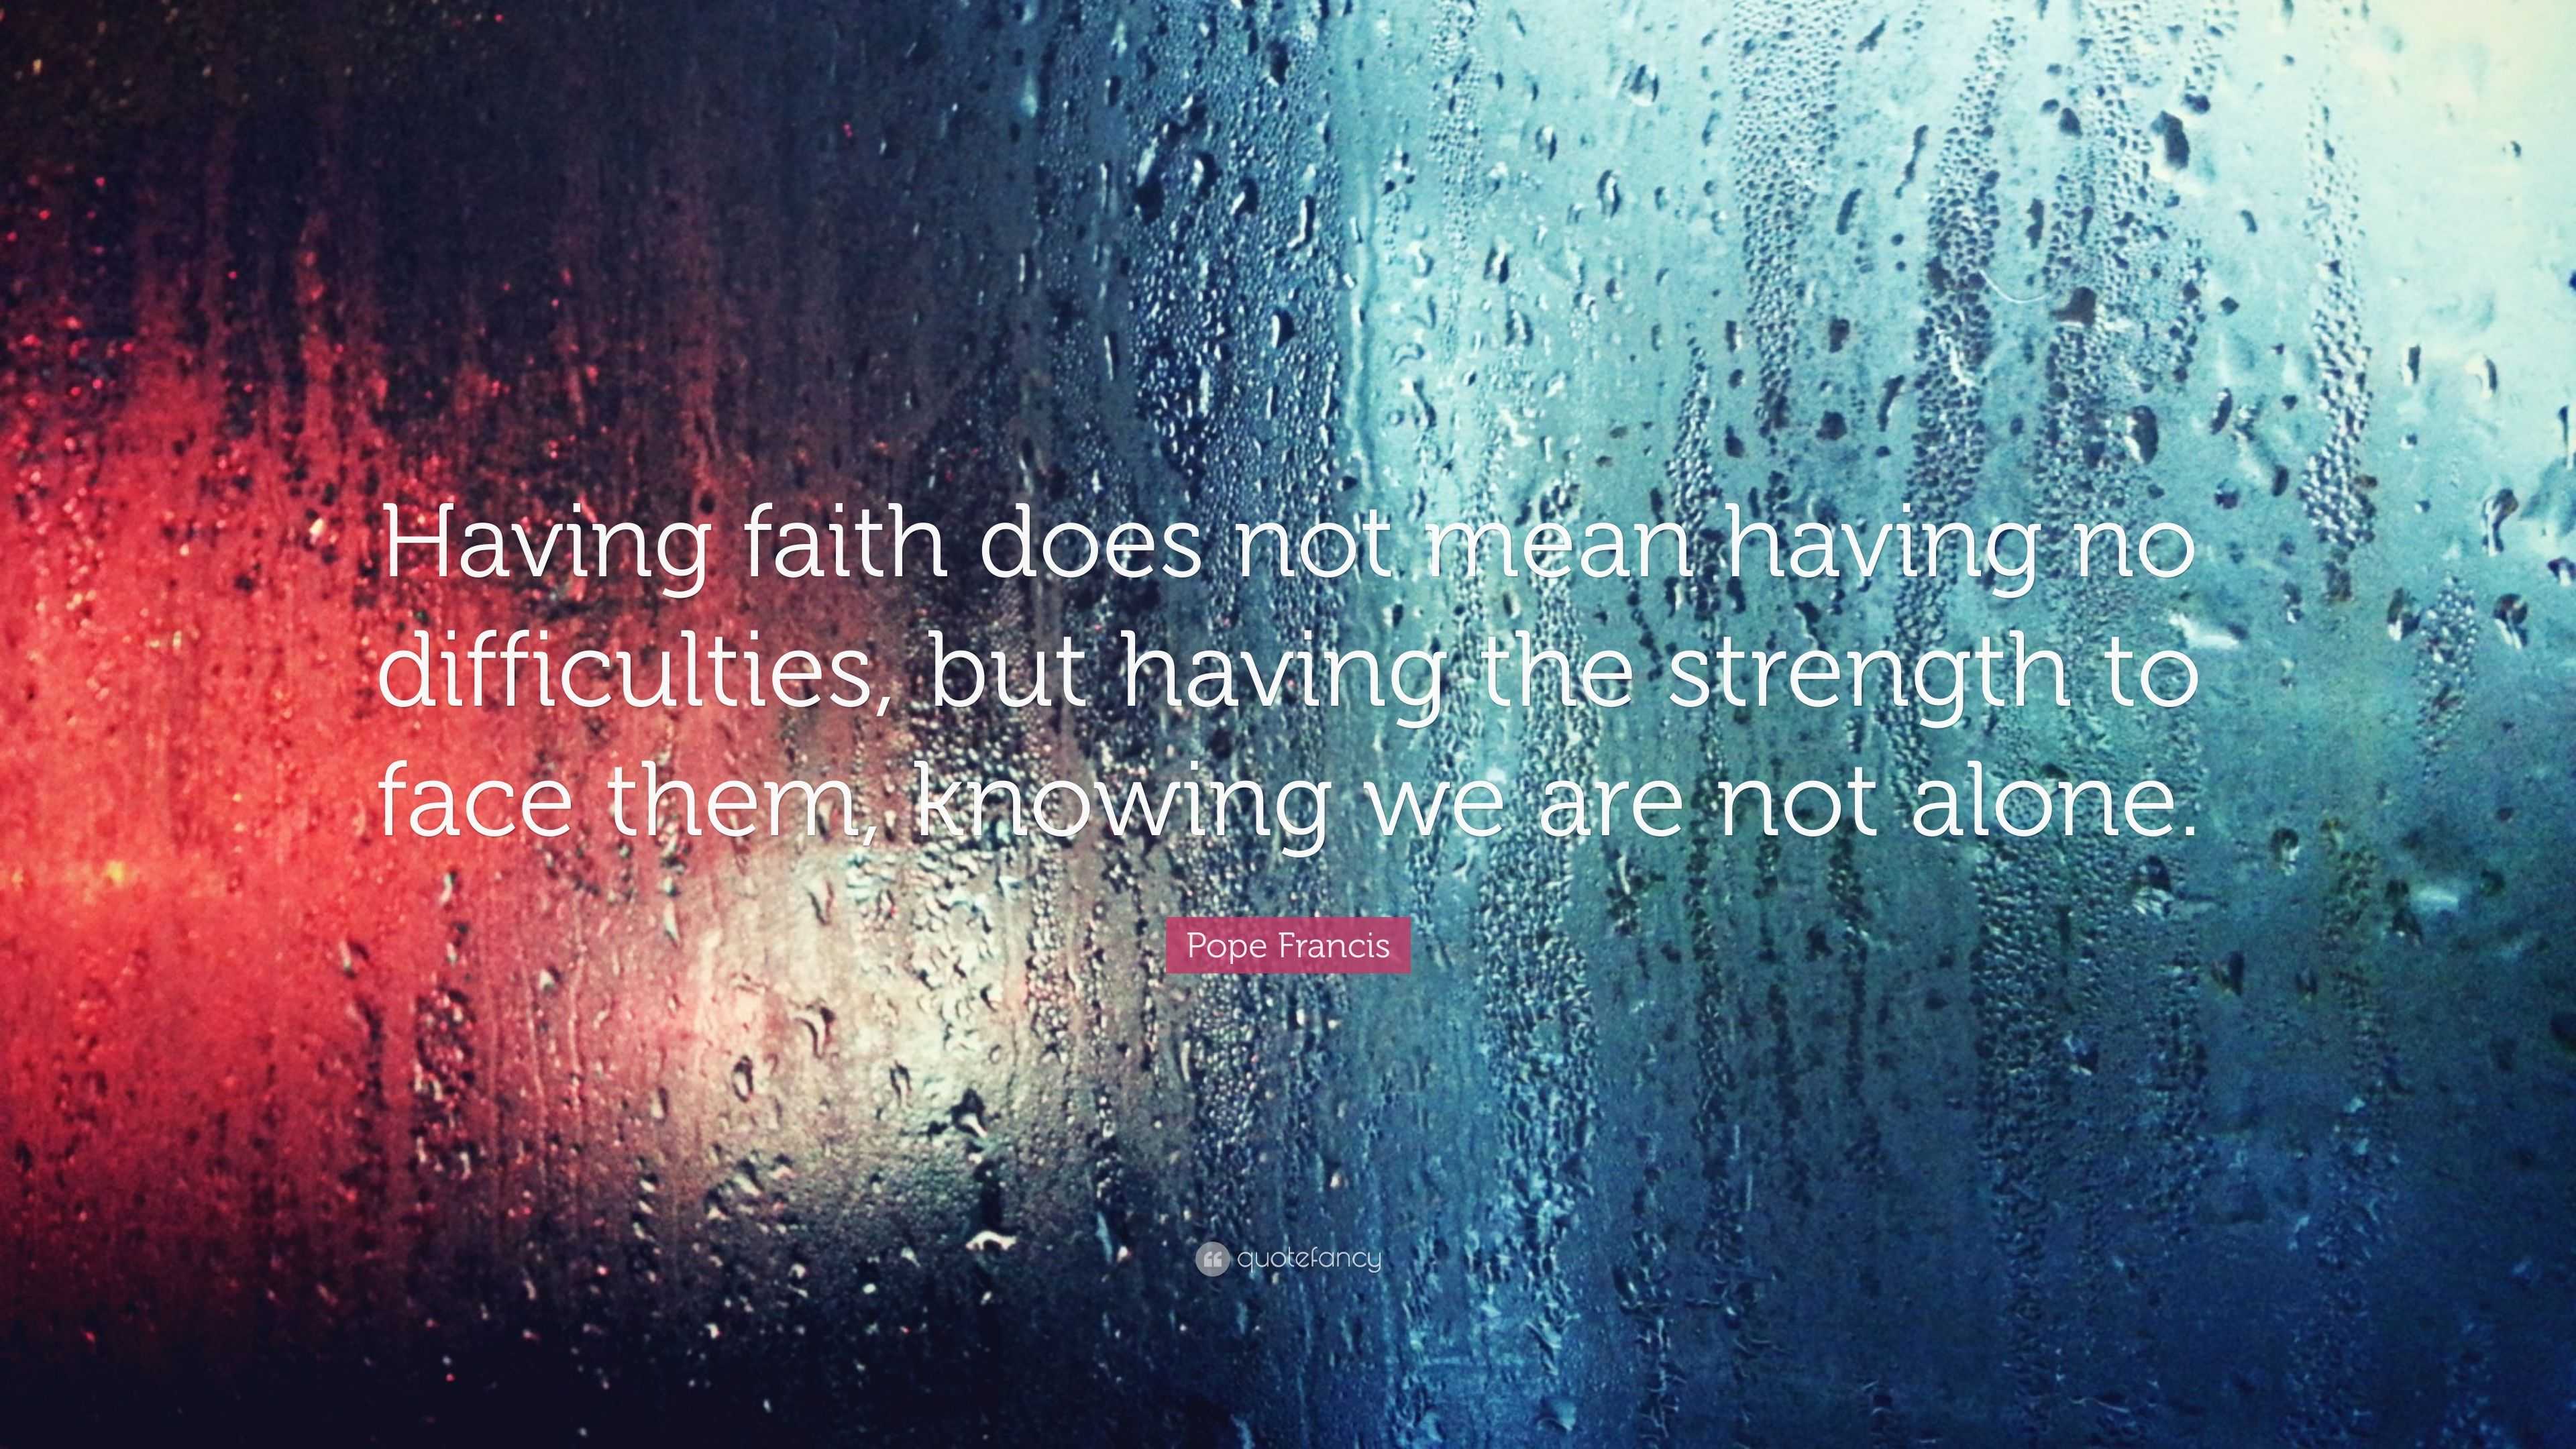 4829984 Pope Francis Quote Having faith does not mean having no